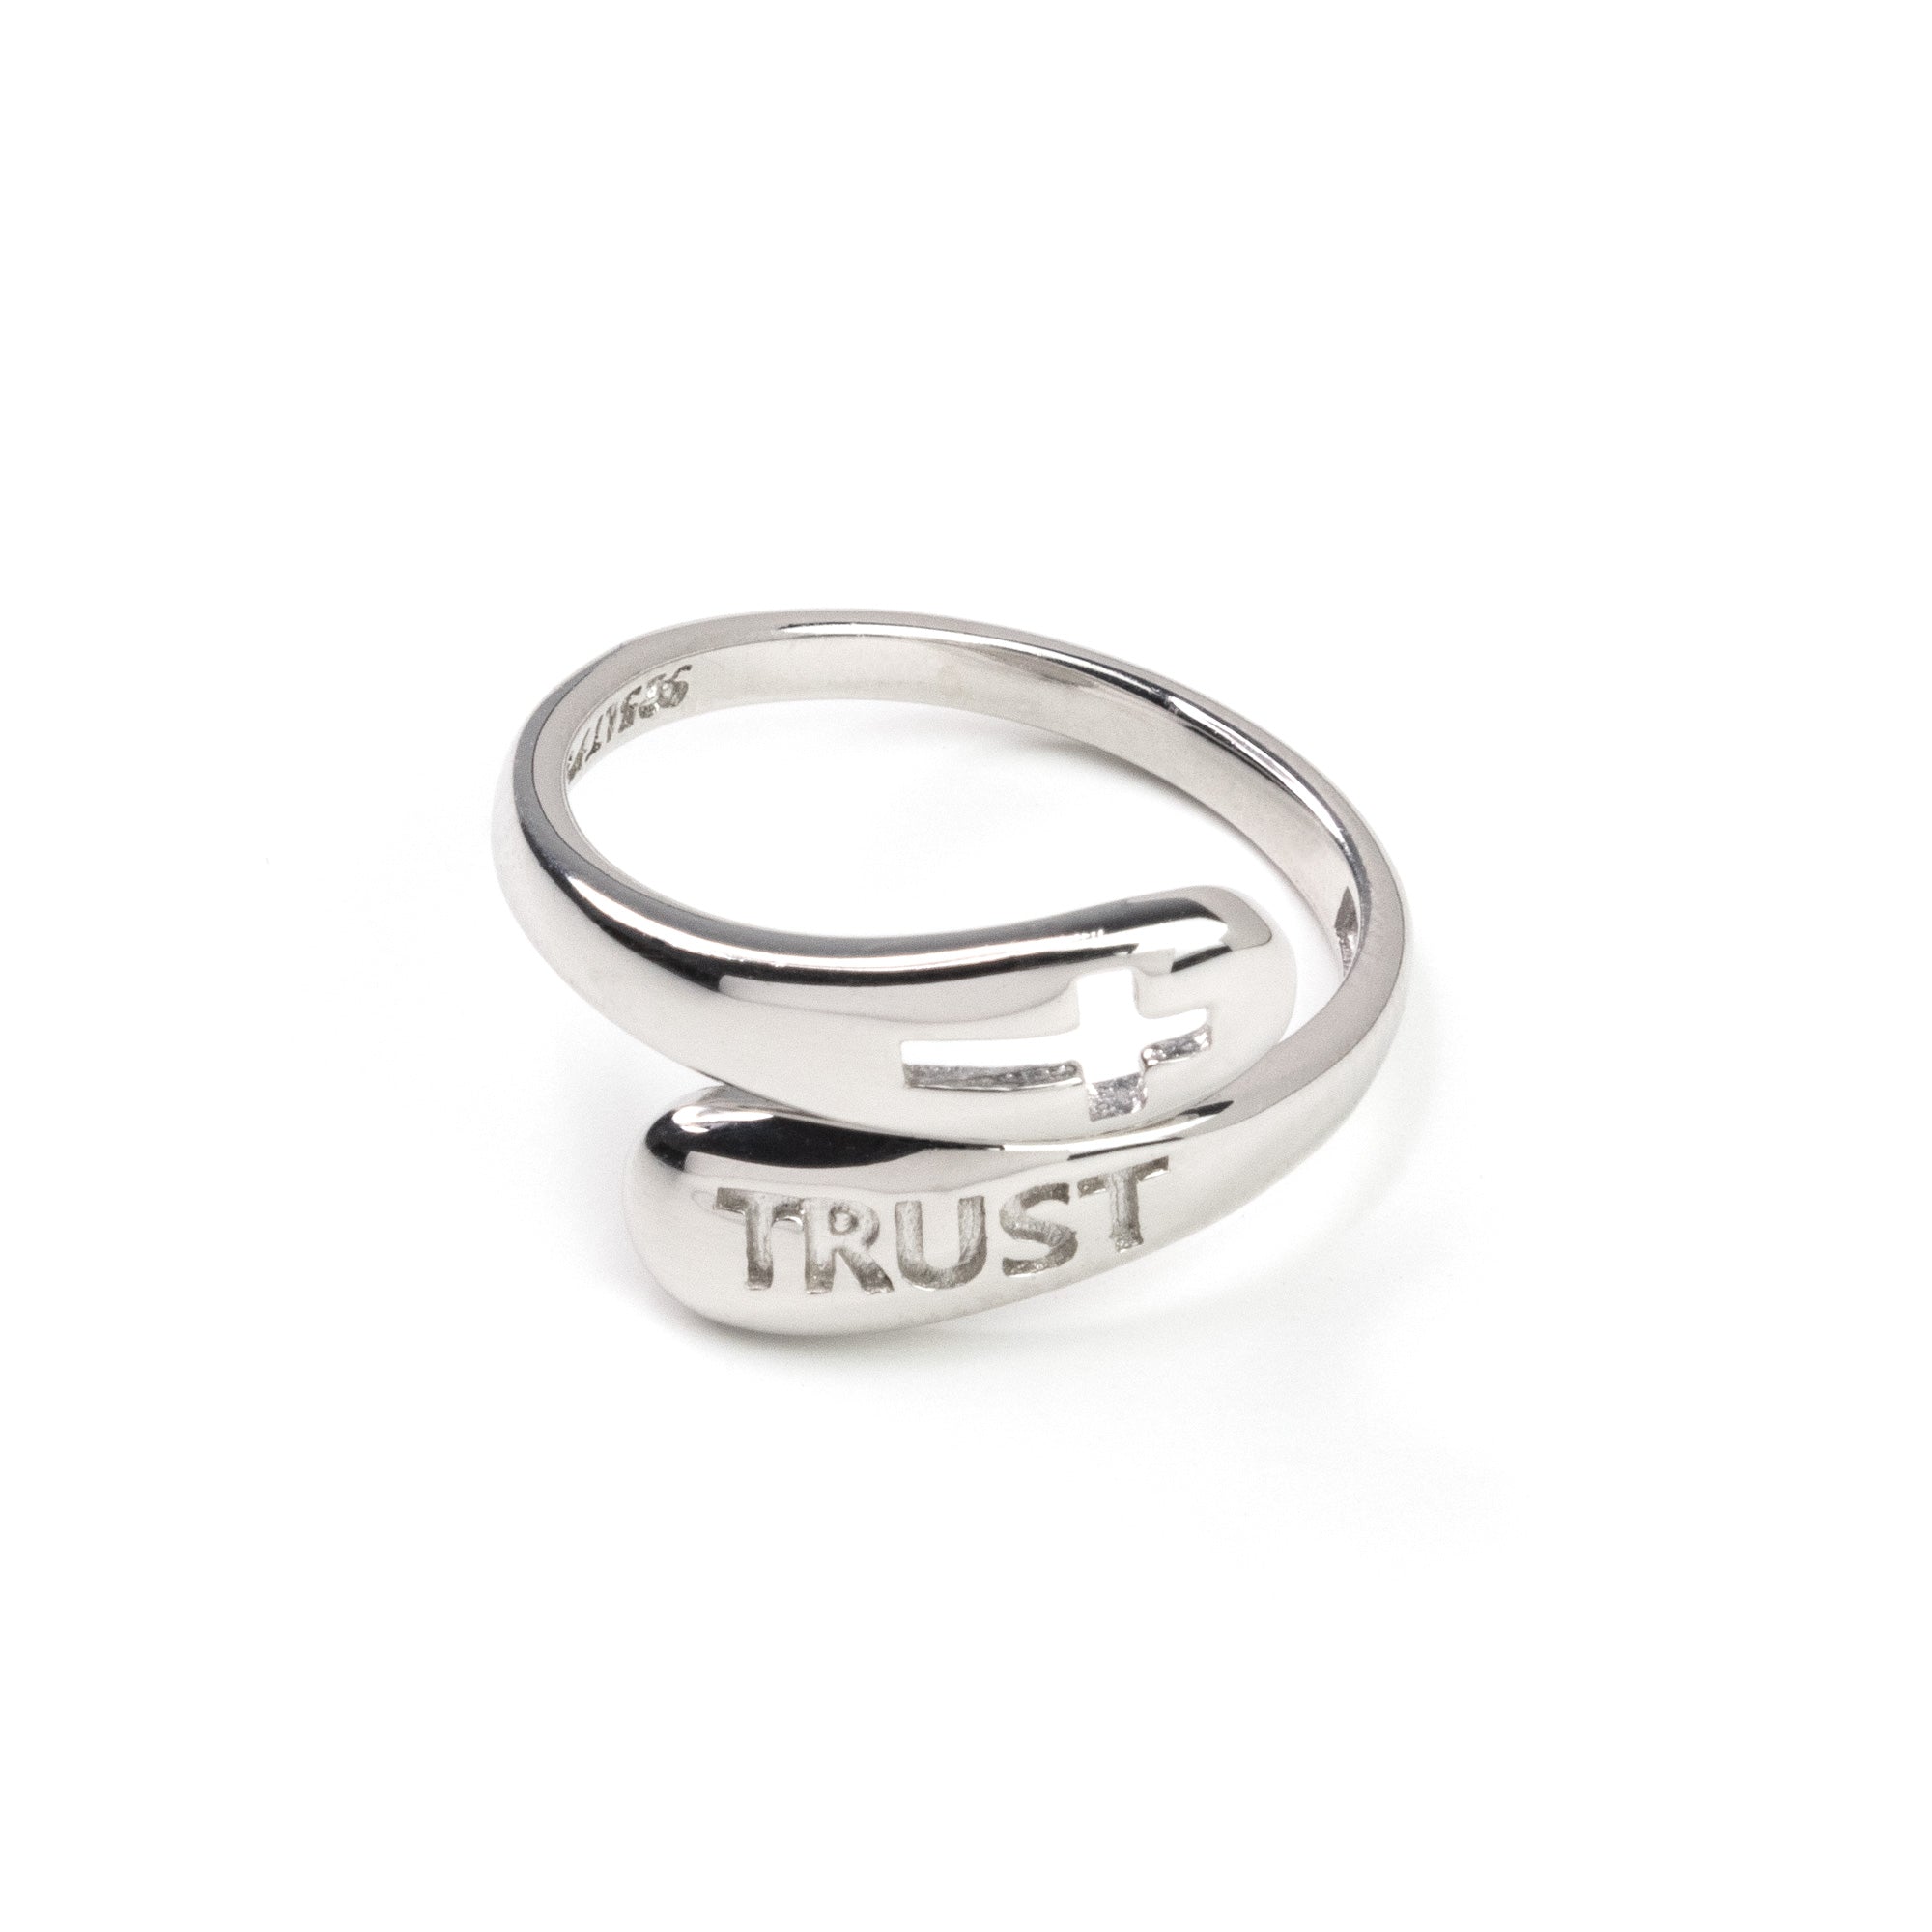 Sterling Silver Wrap Ring - Trust and Cut Out Cross, One Size Fits Most